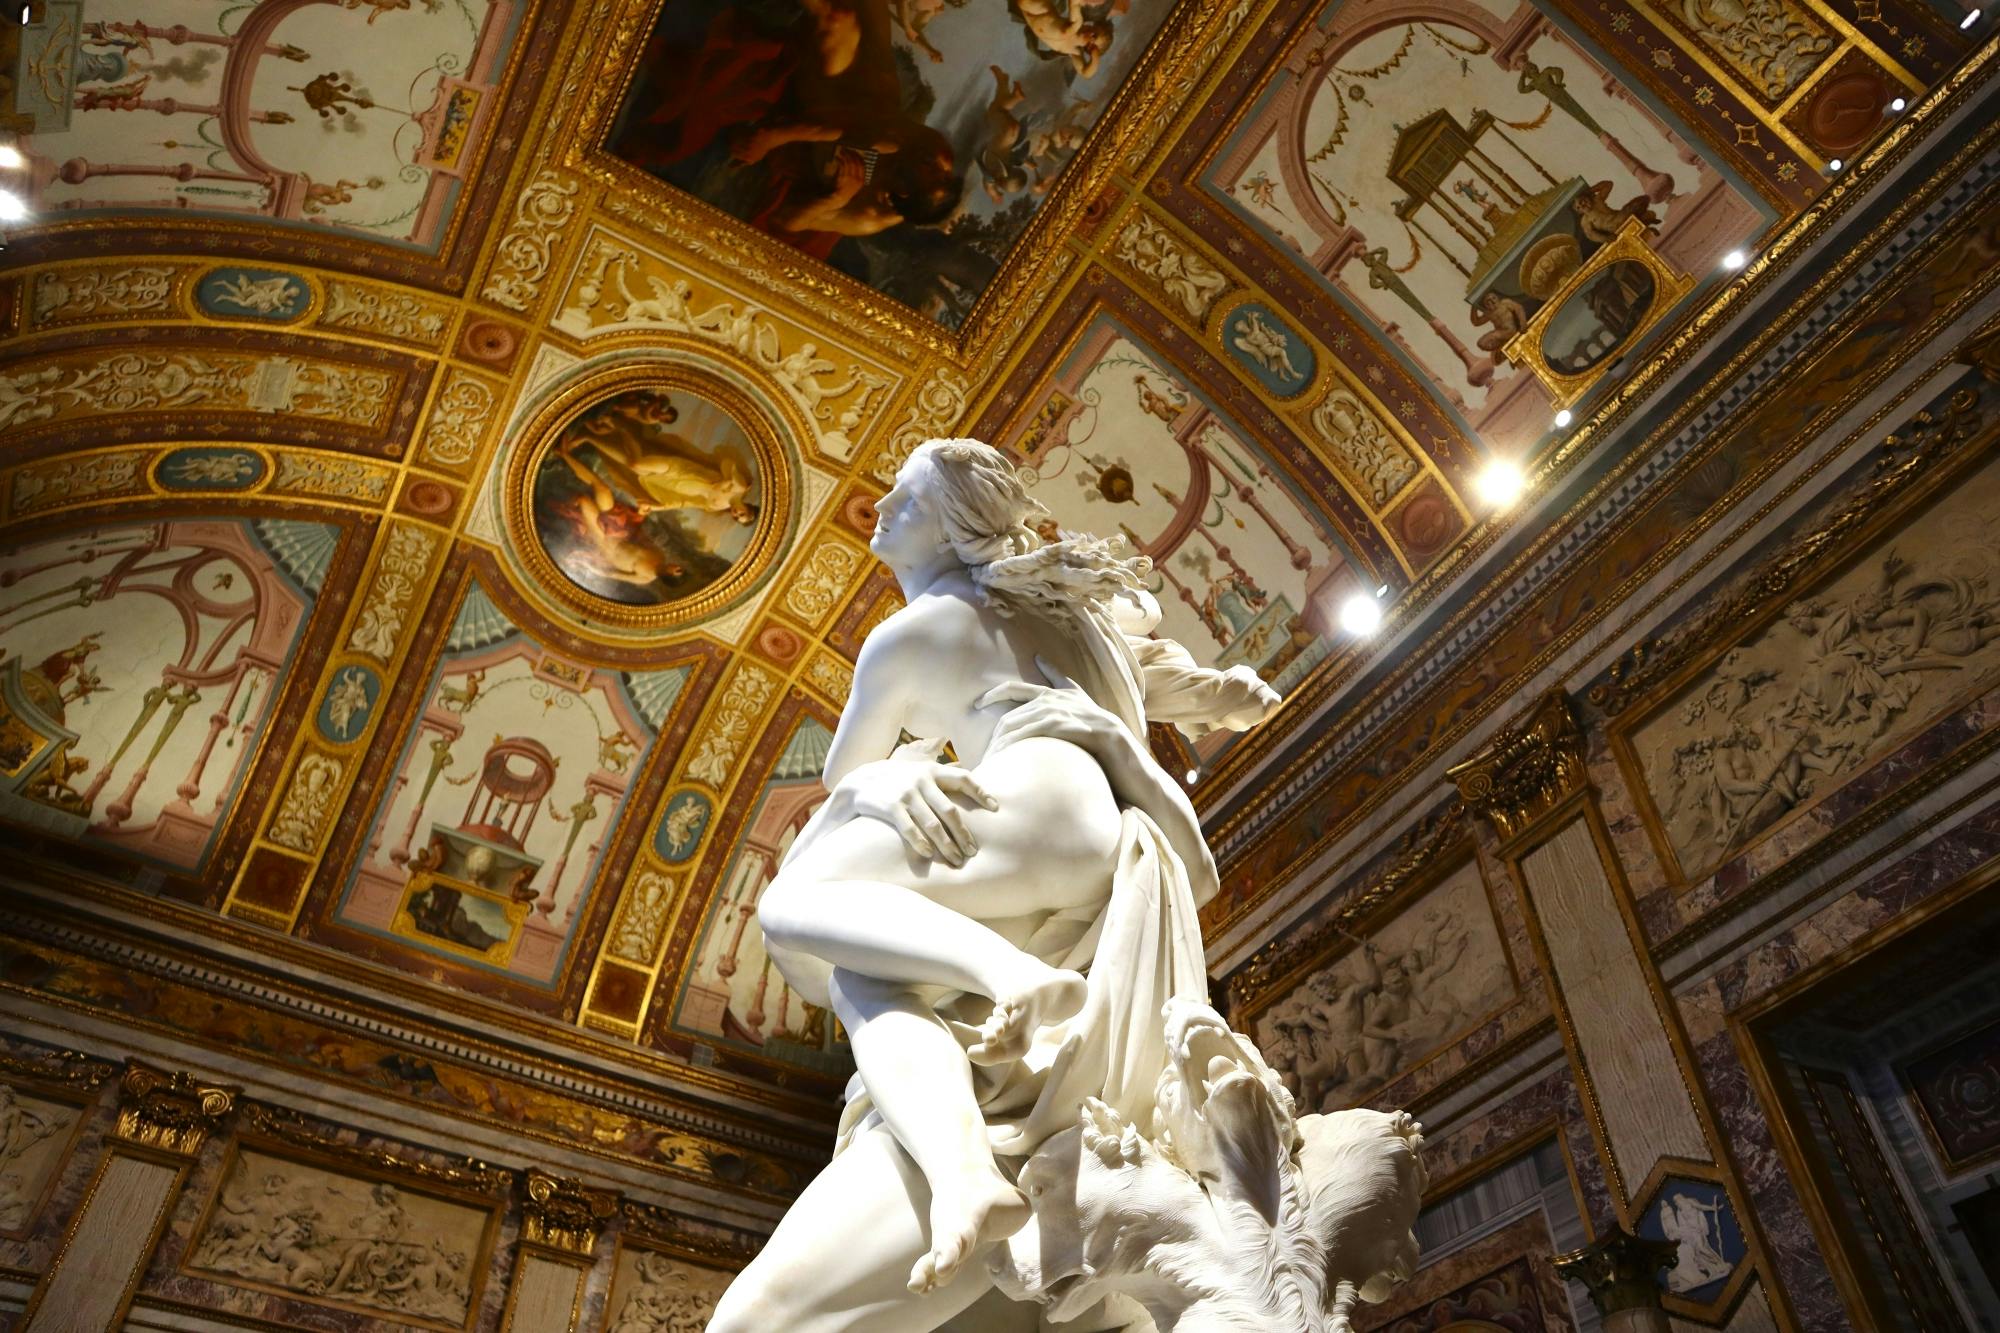 Borghese Gallery skip the line tickets and Gardens golf cart tour Musement